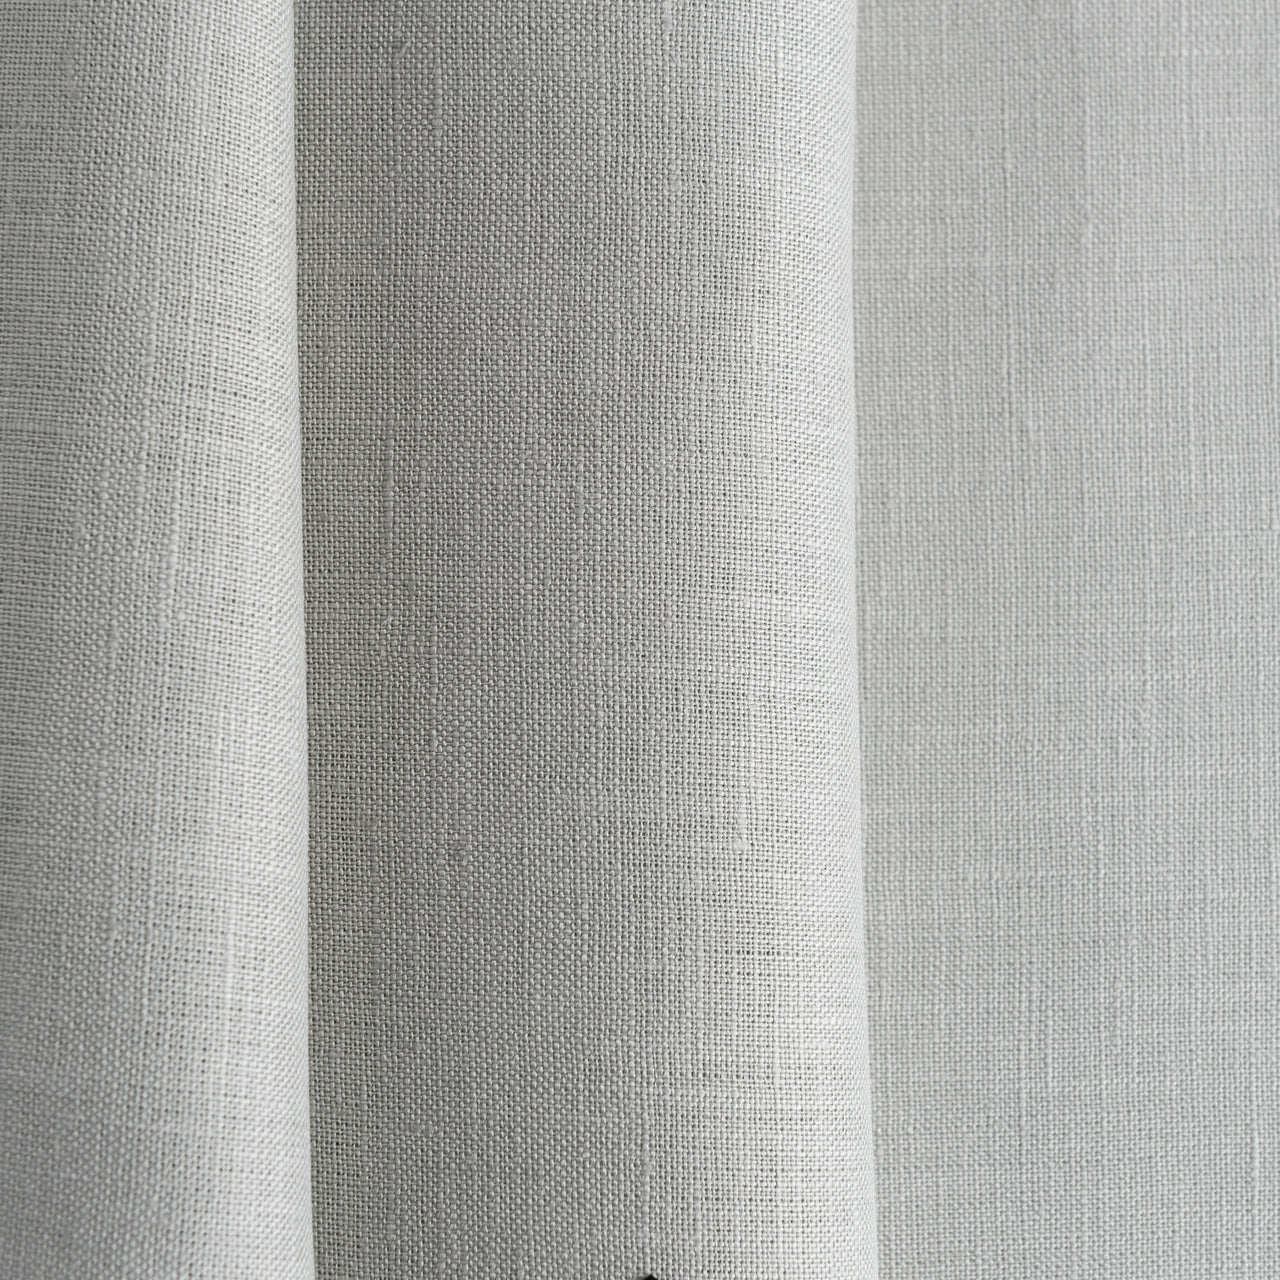 Stone Grey Linen Fabric by the Meter - 100% French Natural - Width 133 cm, 267 cm